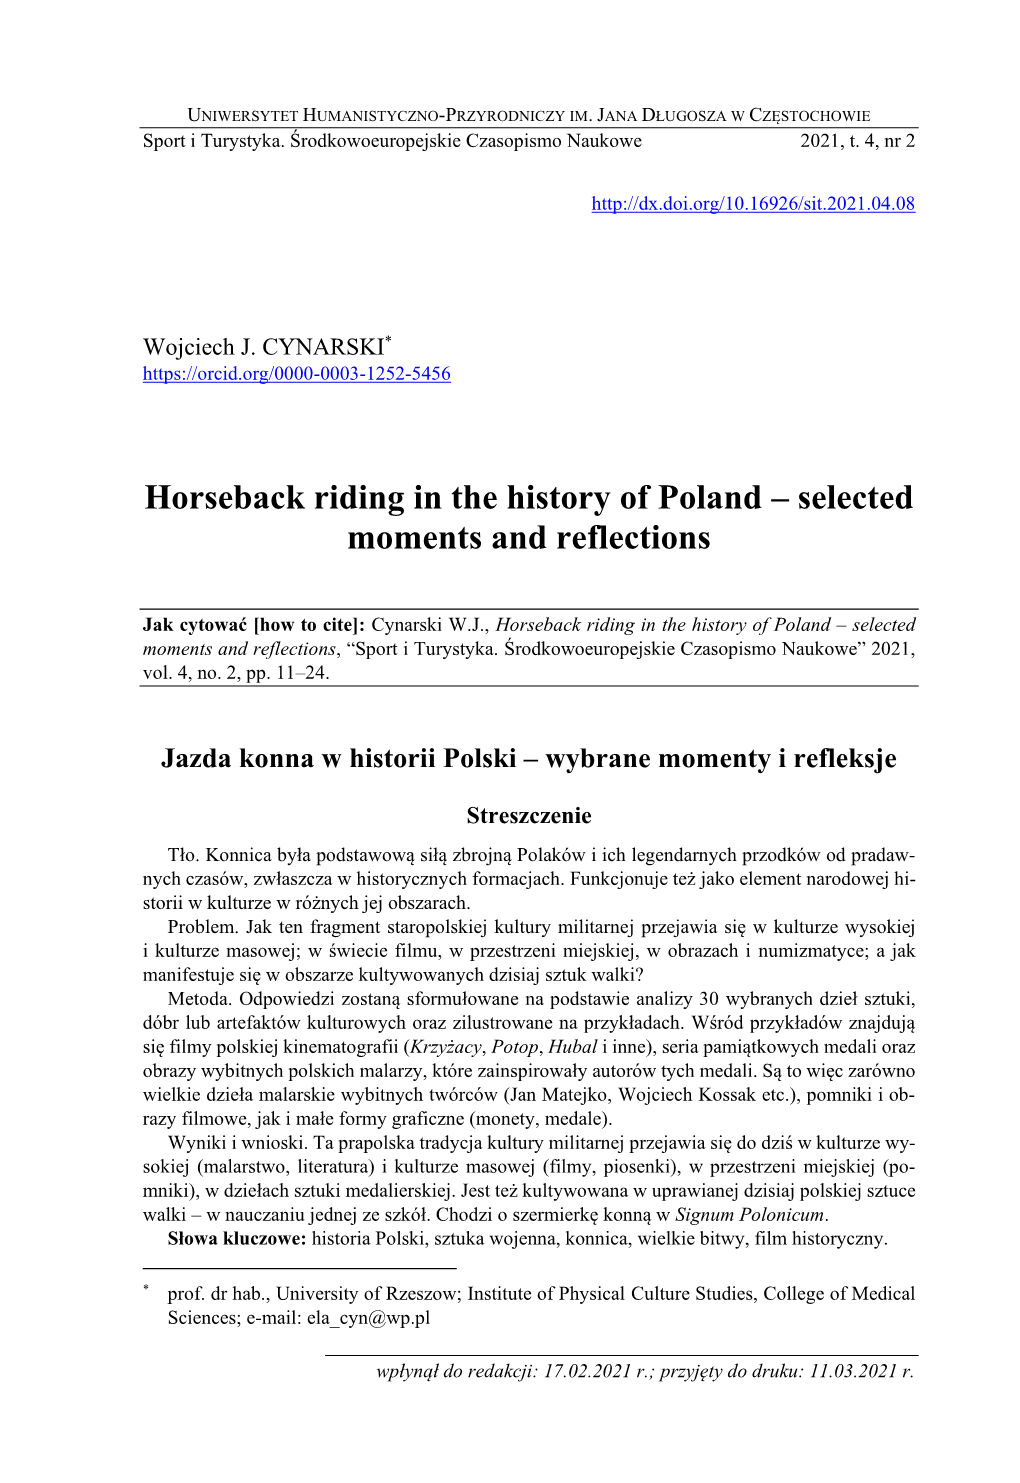 Horseback Riding in the History of Poland – Selected Moments and Reflections